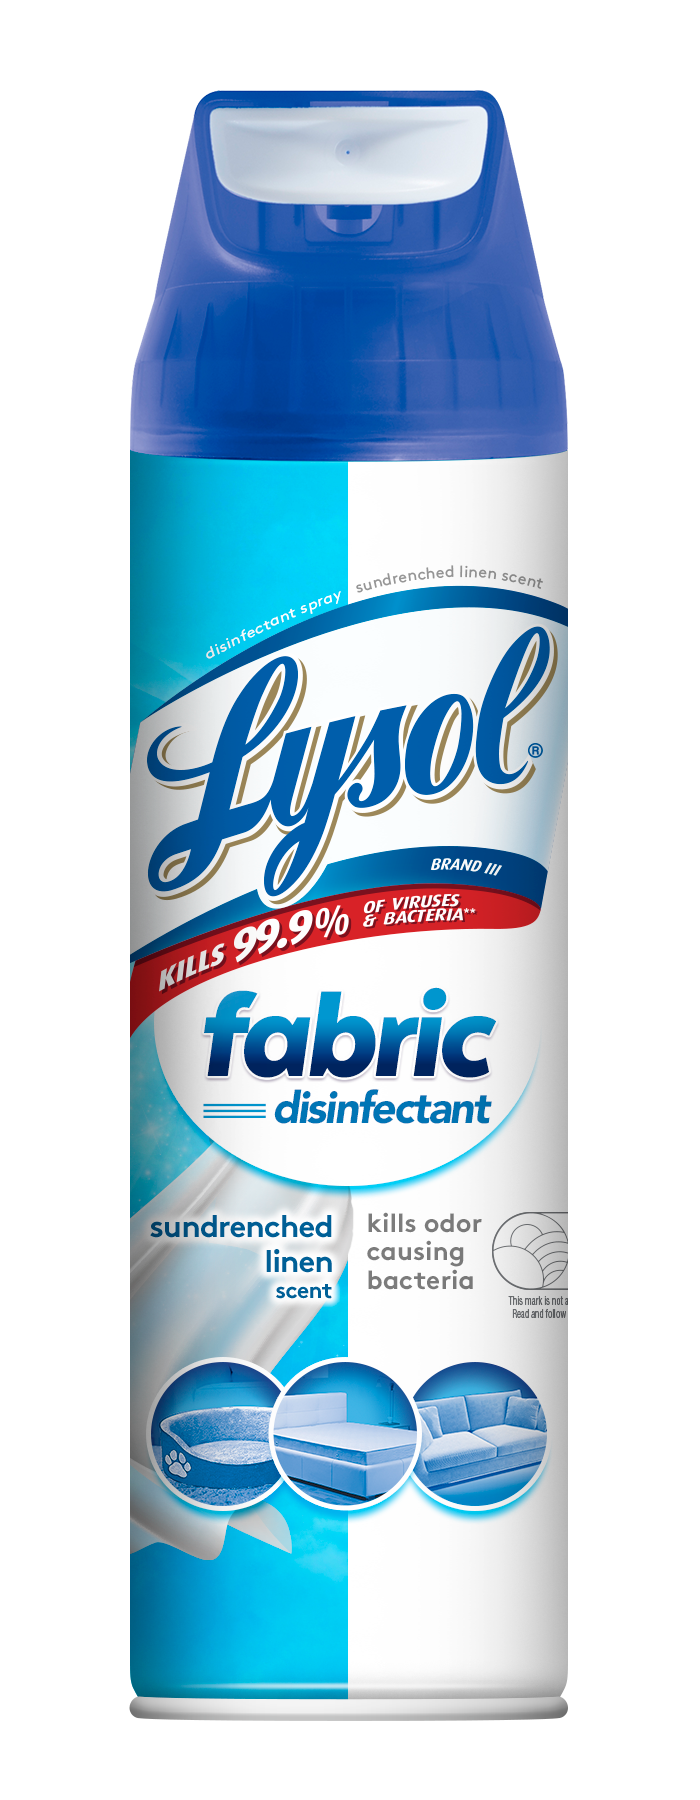 LYSOL® Fabric Disinfectant - Sundrenched Linen